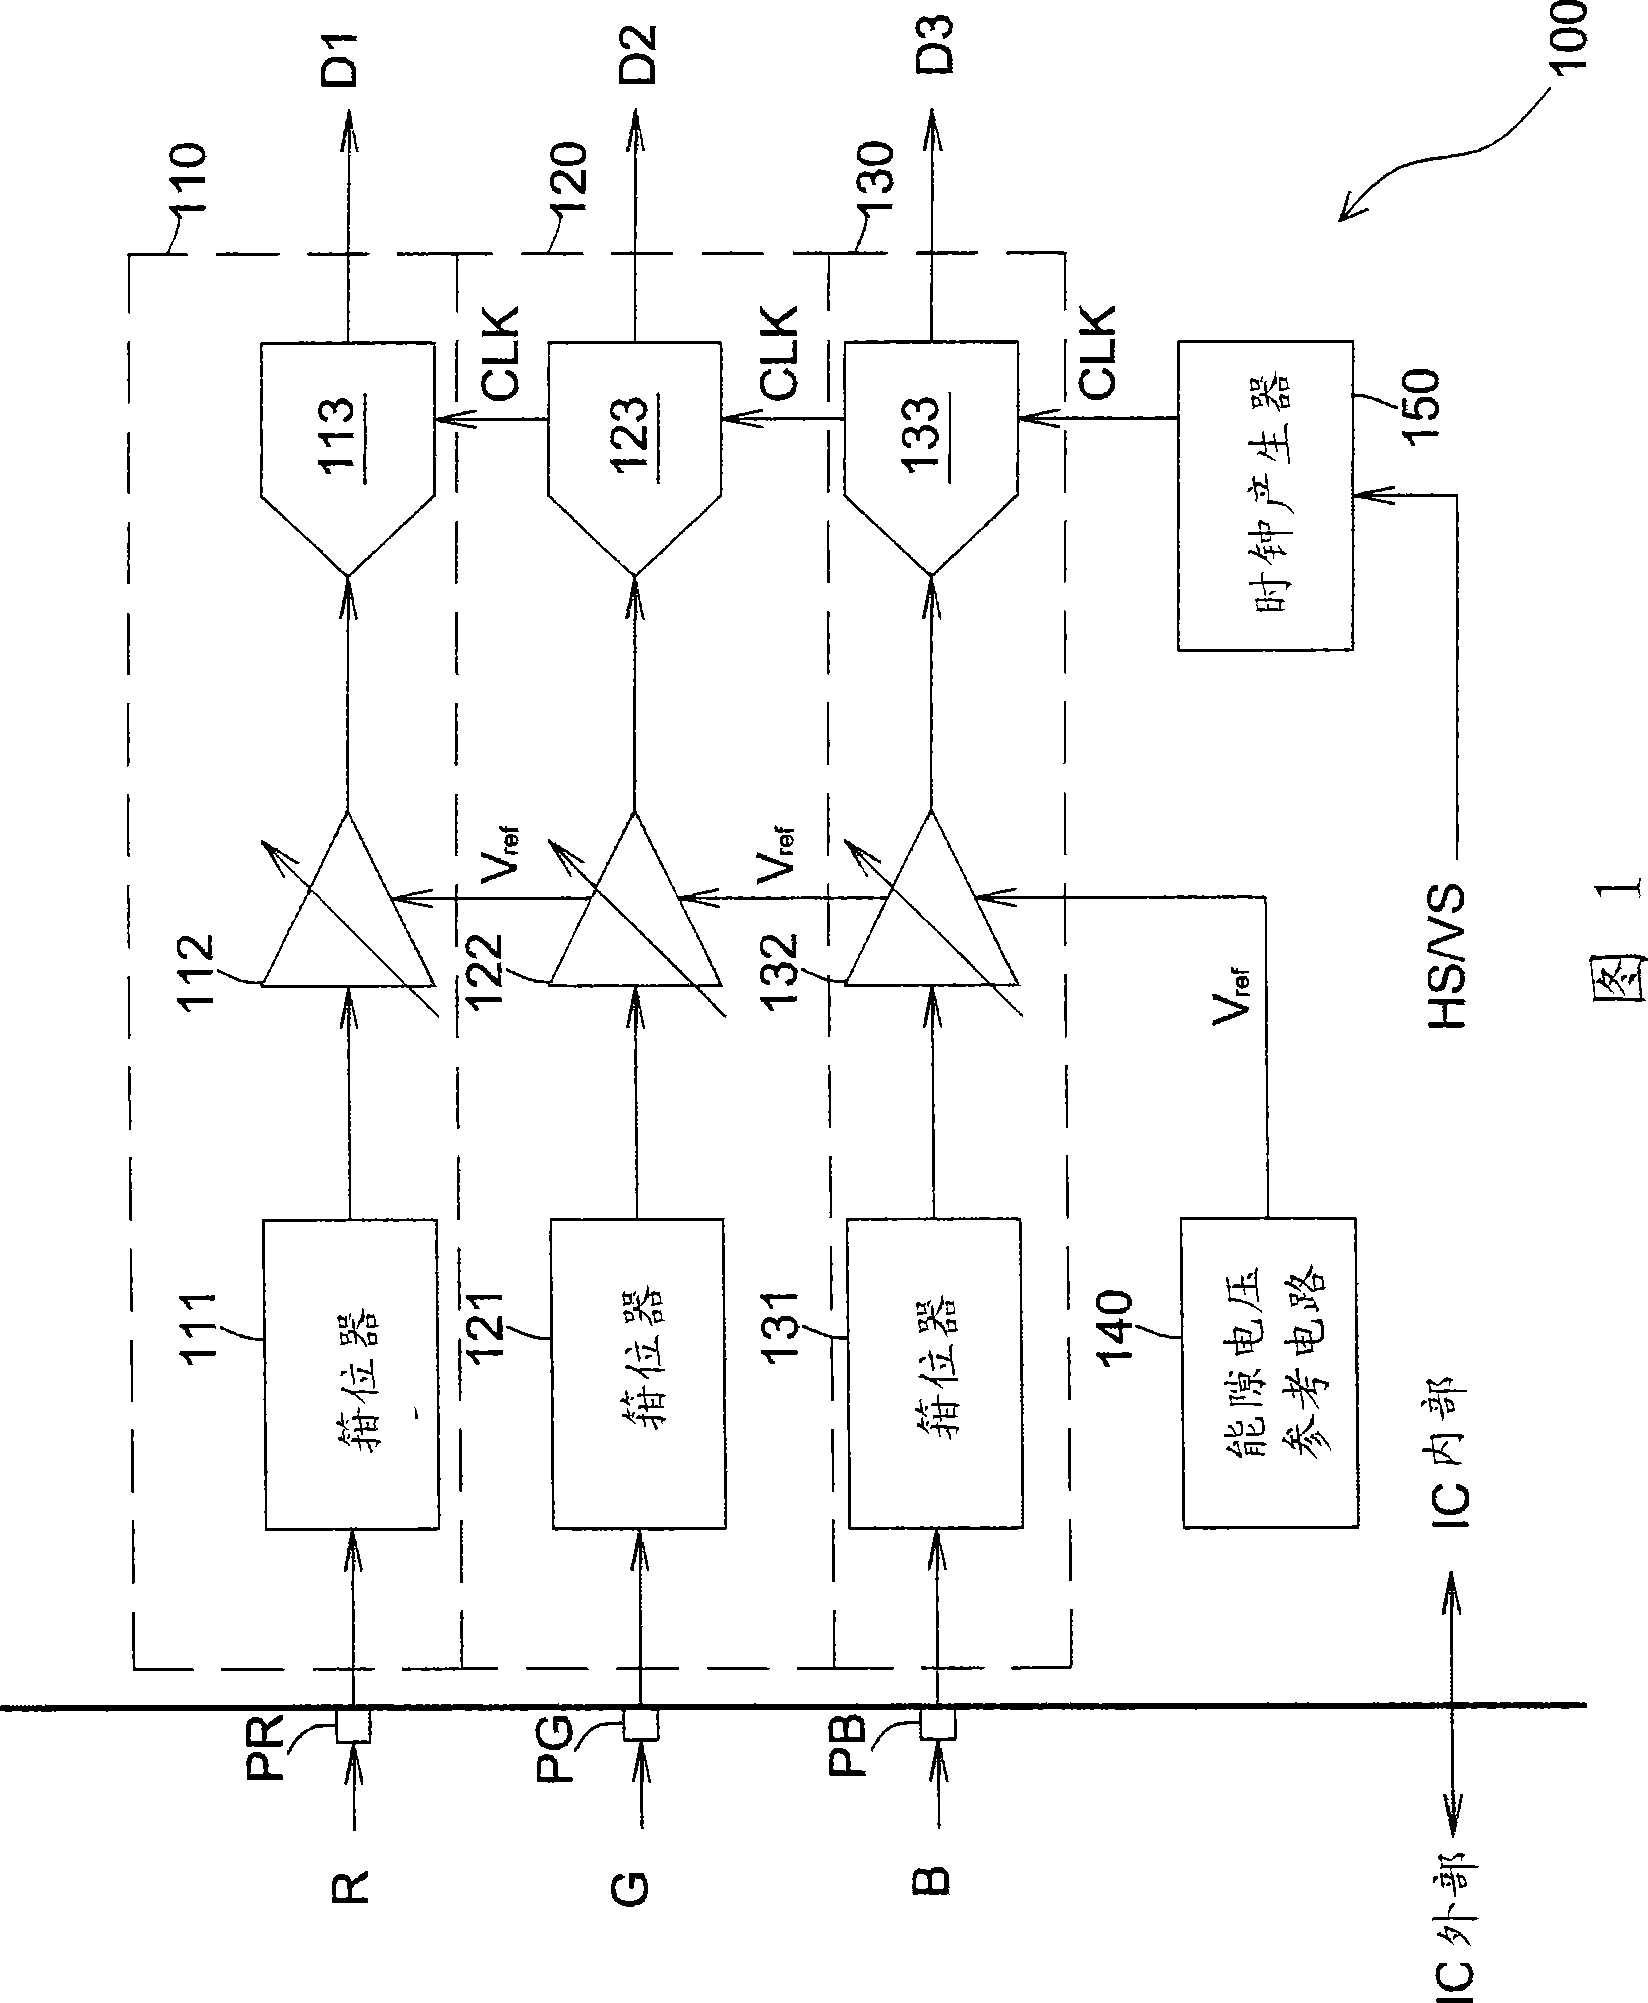 Virtual differential analog front end circuit and image processing apparatus